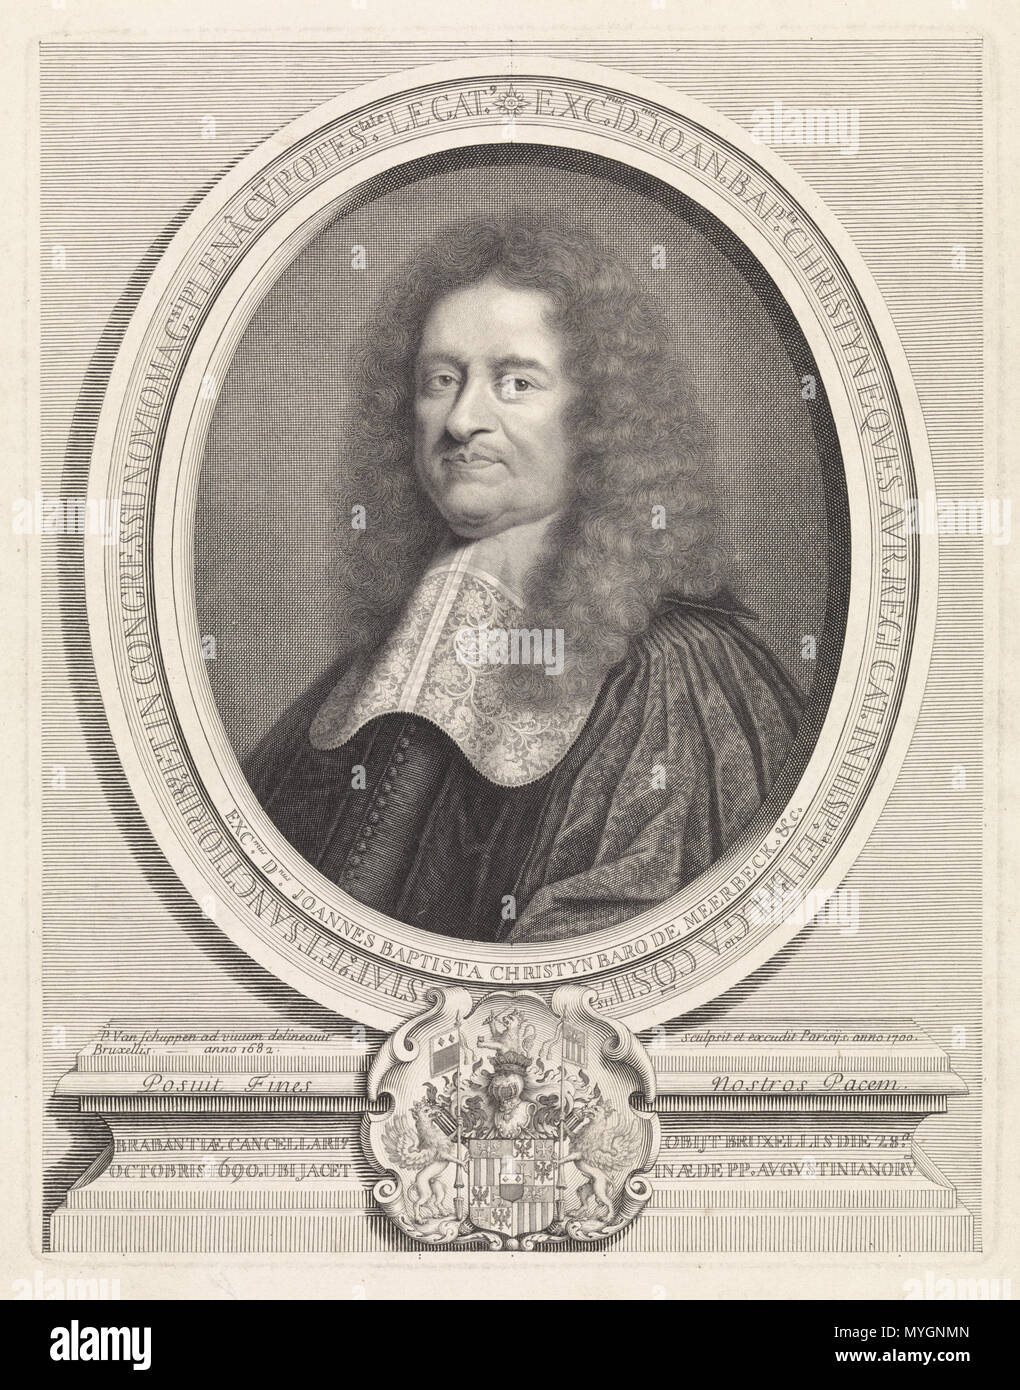 . English: A 1700 engraving by Pieter van Schuppen from a portrait of Jean-Baptiste Christyn made c. 1678 . 1700. Pieter van Schuppen 271 Jean-Baptiste Christyn, Chancellor of Brabant Stock Photo